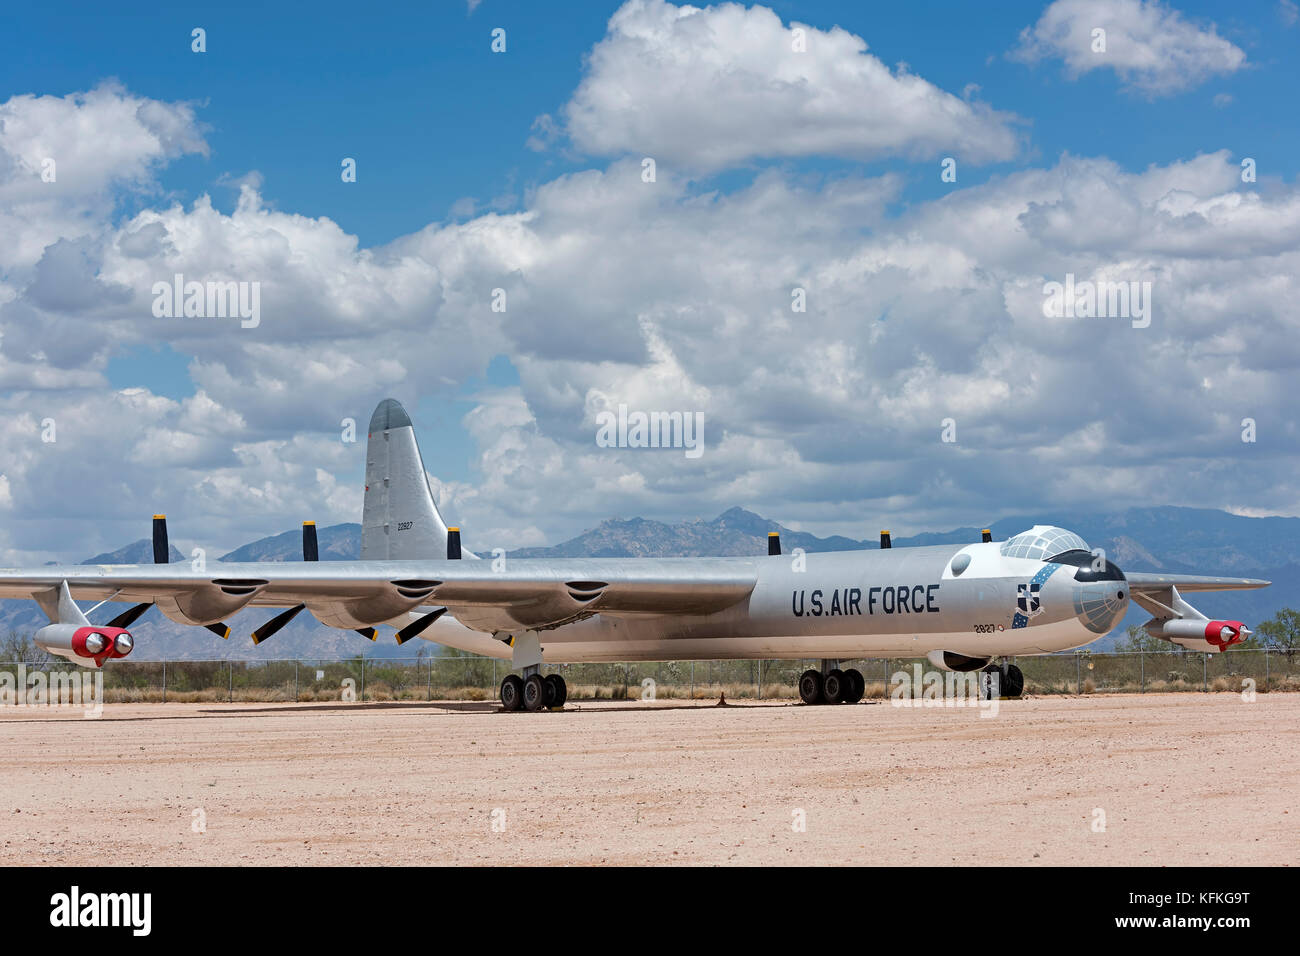 Strategic long-range bomber with six propellers and piston engines, 1947-1954, the biggest bomber ever flown by the US Air Force Stock Photo